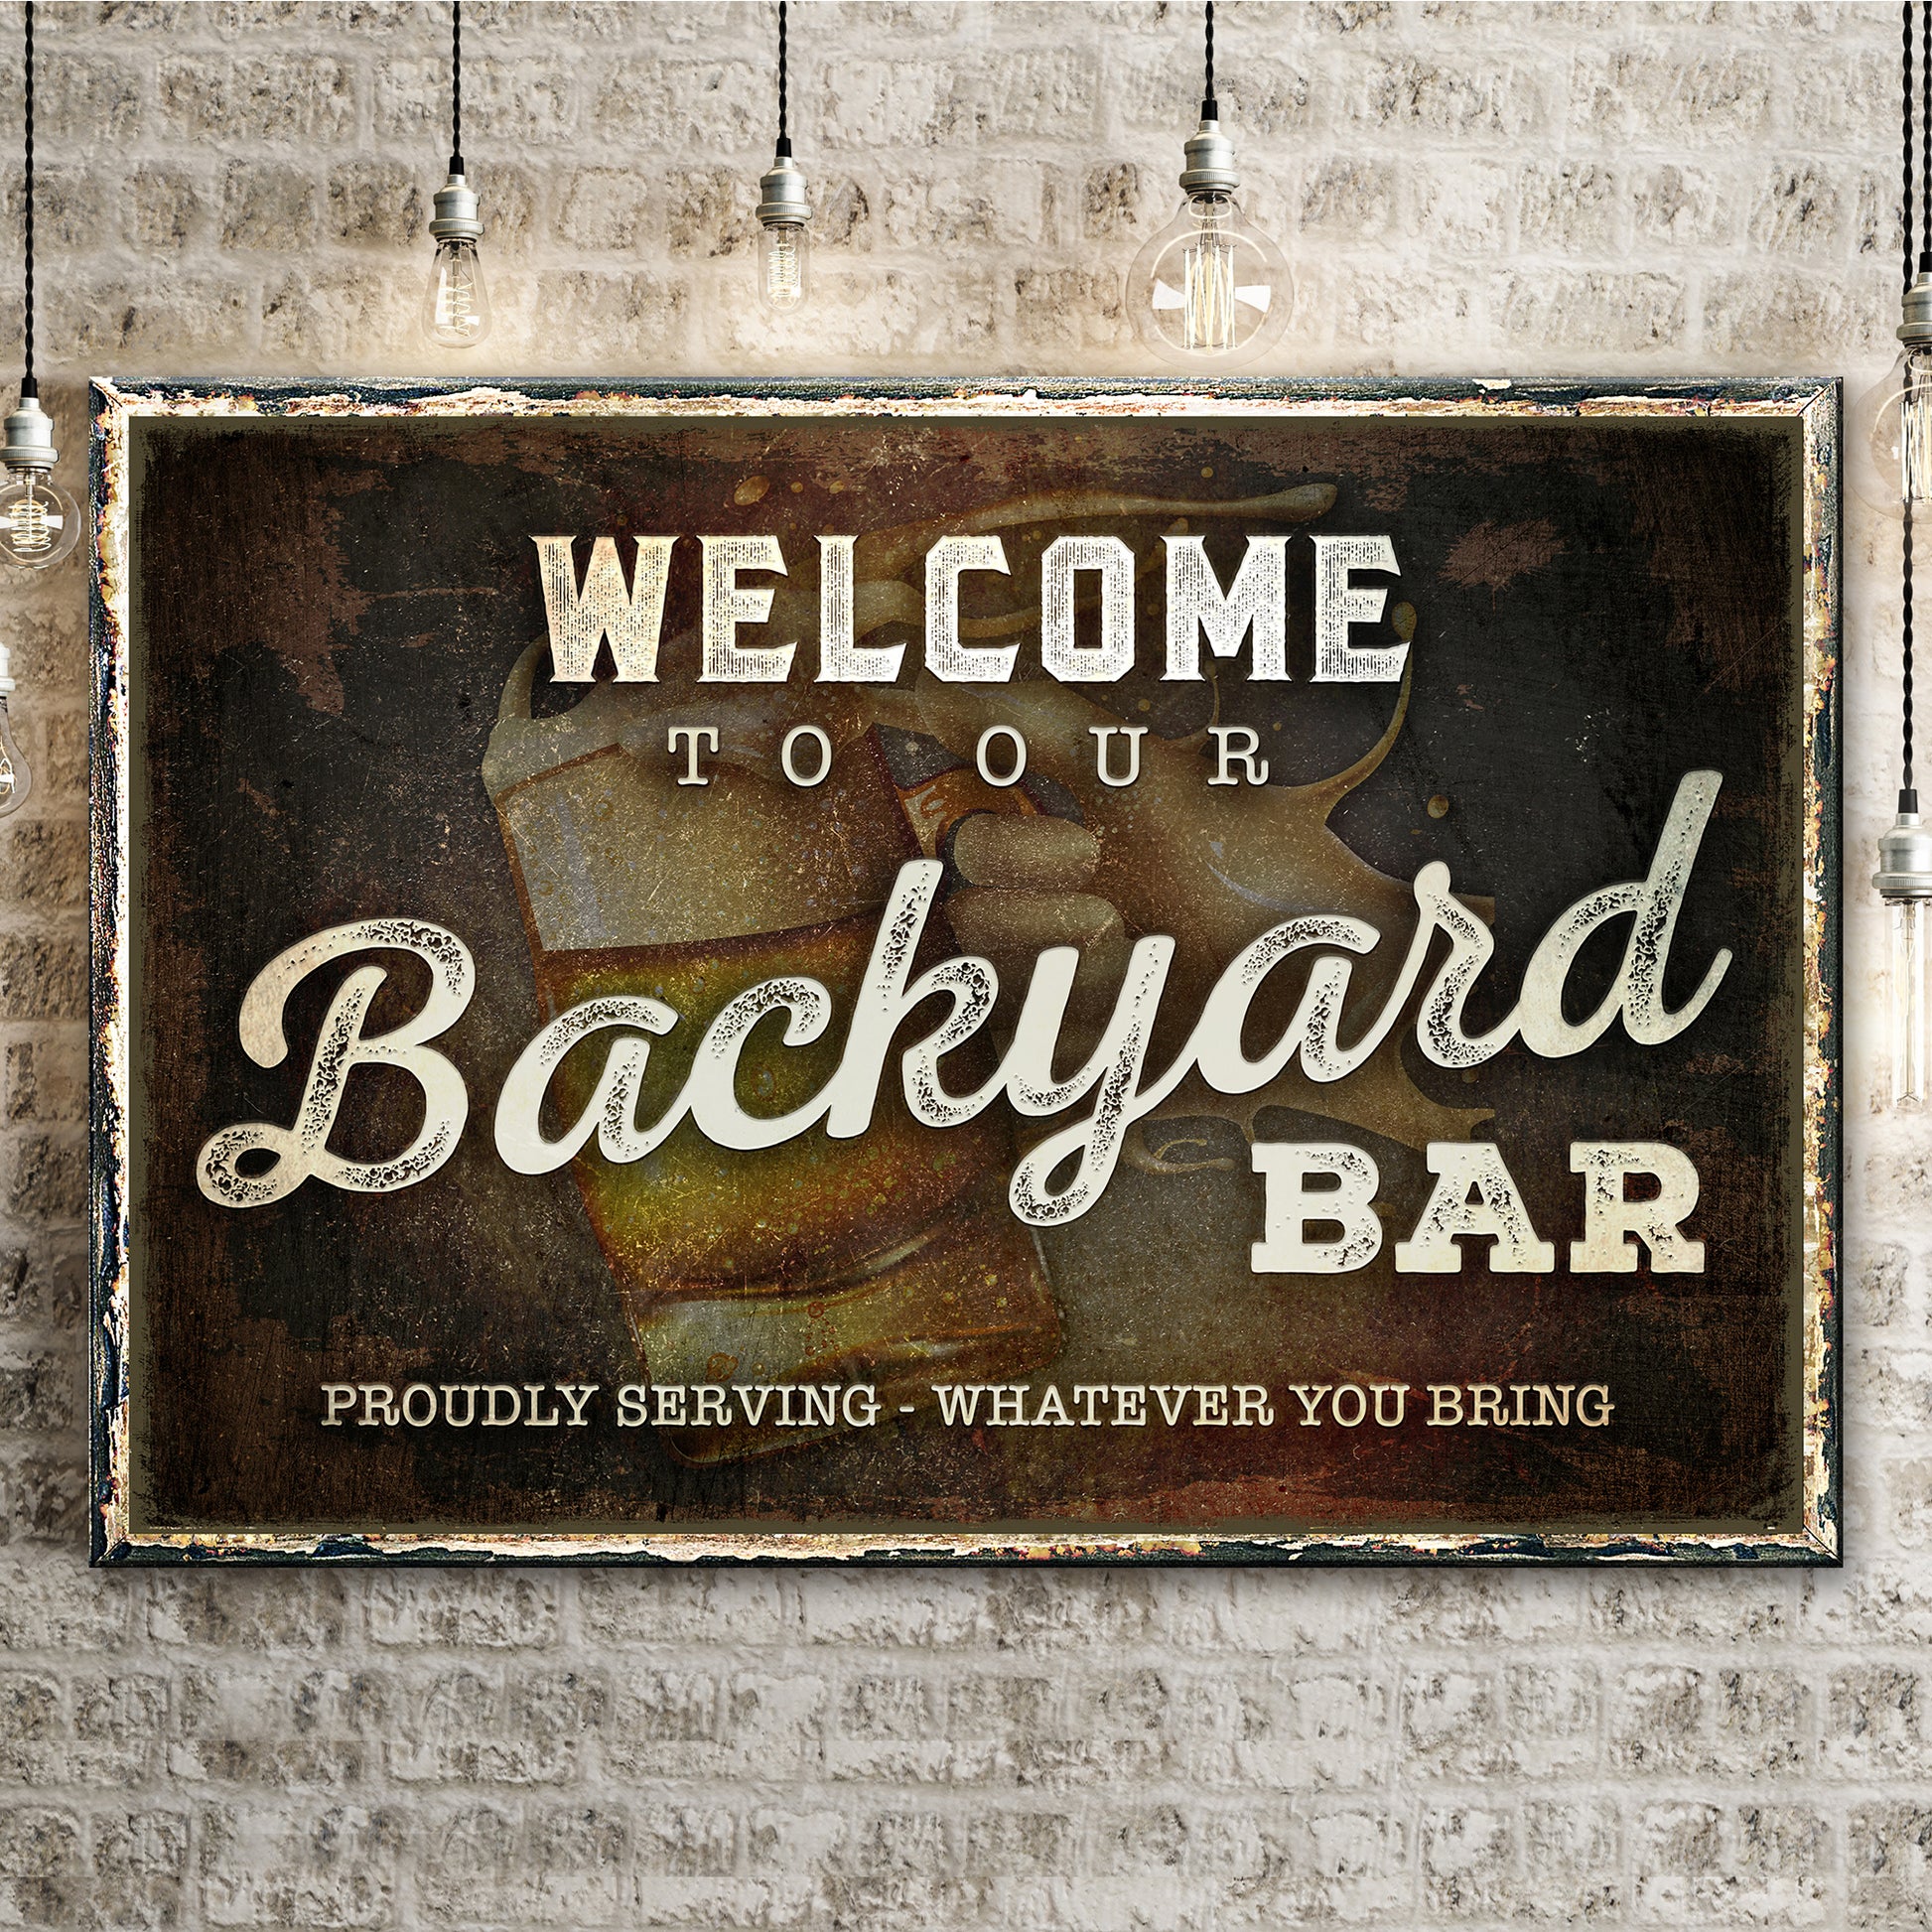 Welcome To Our Backyard Bar Sign - Image by Tailored Canvases